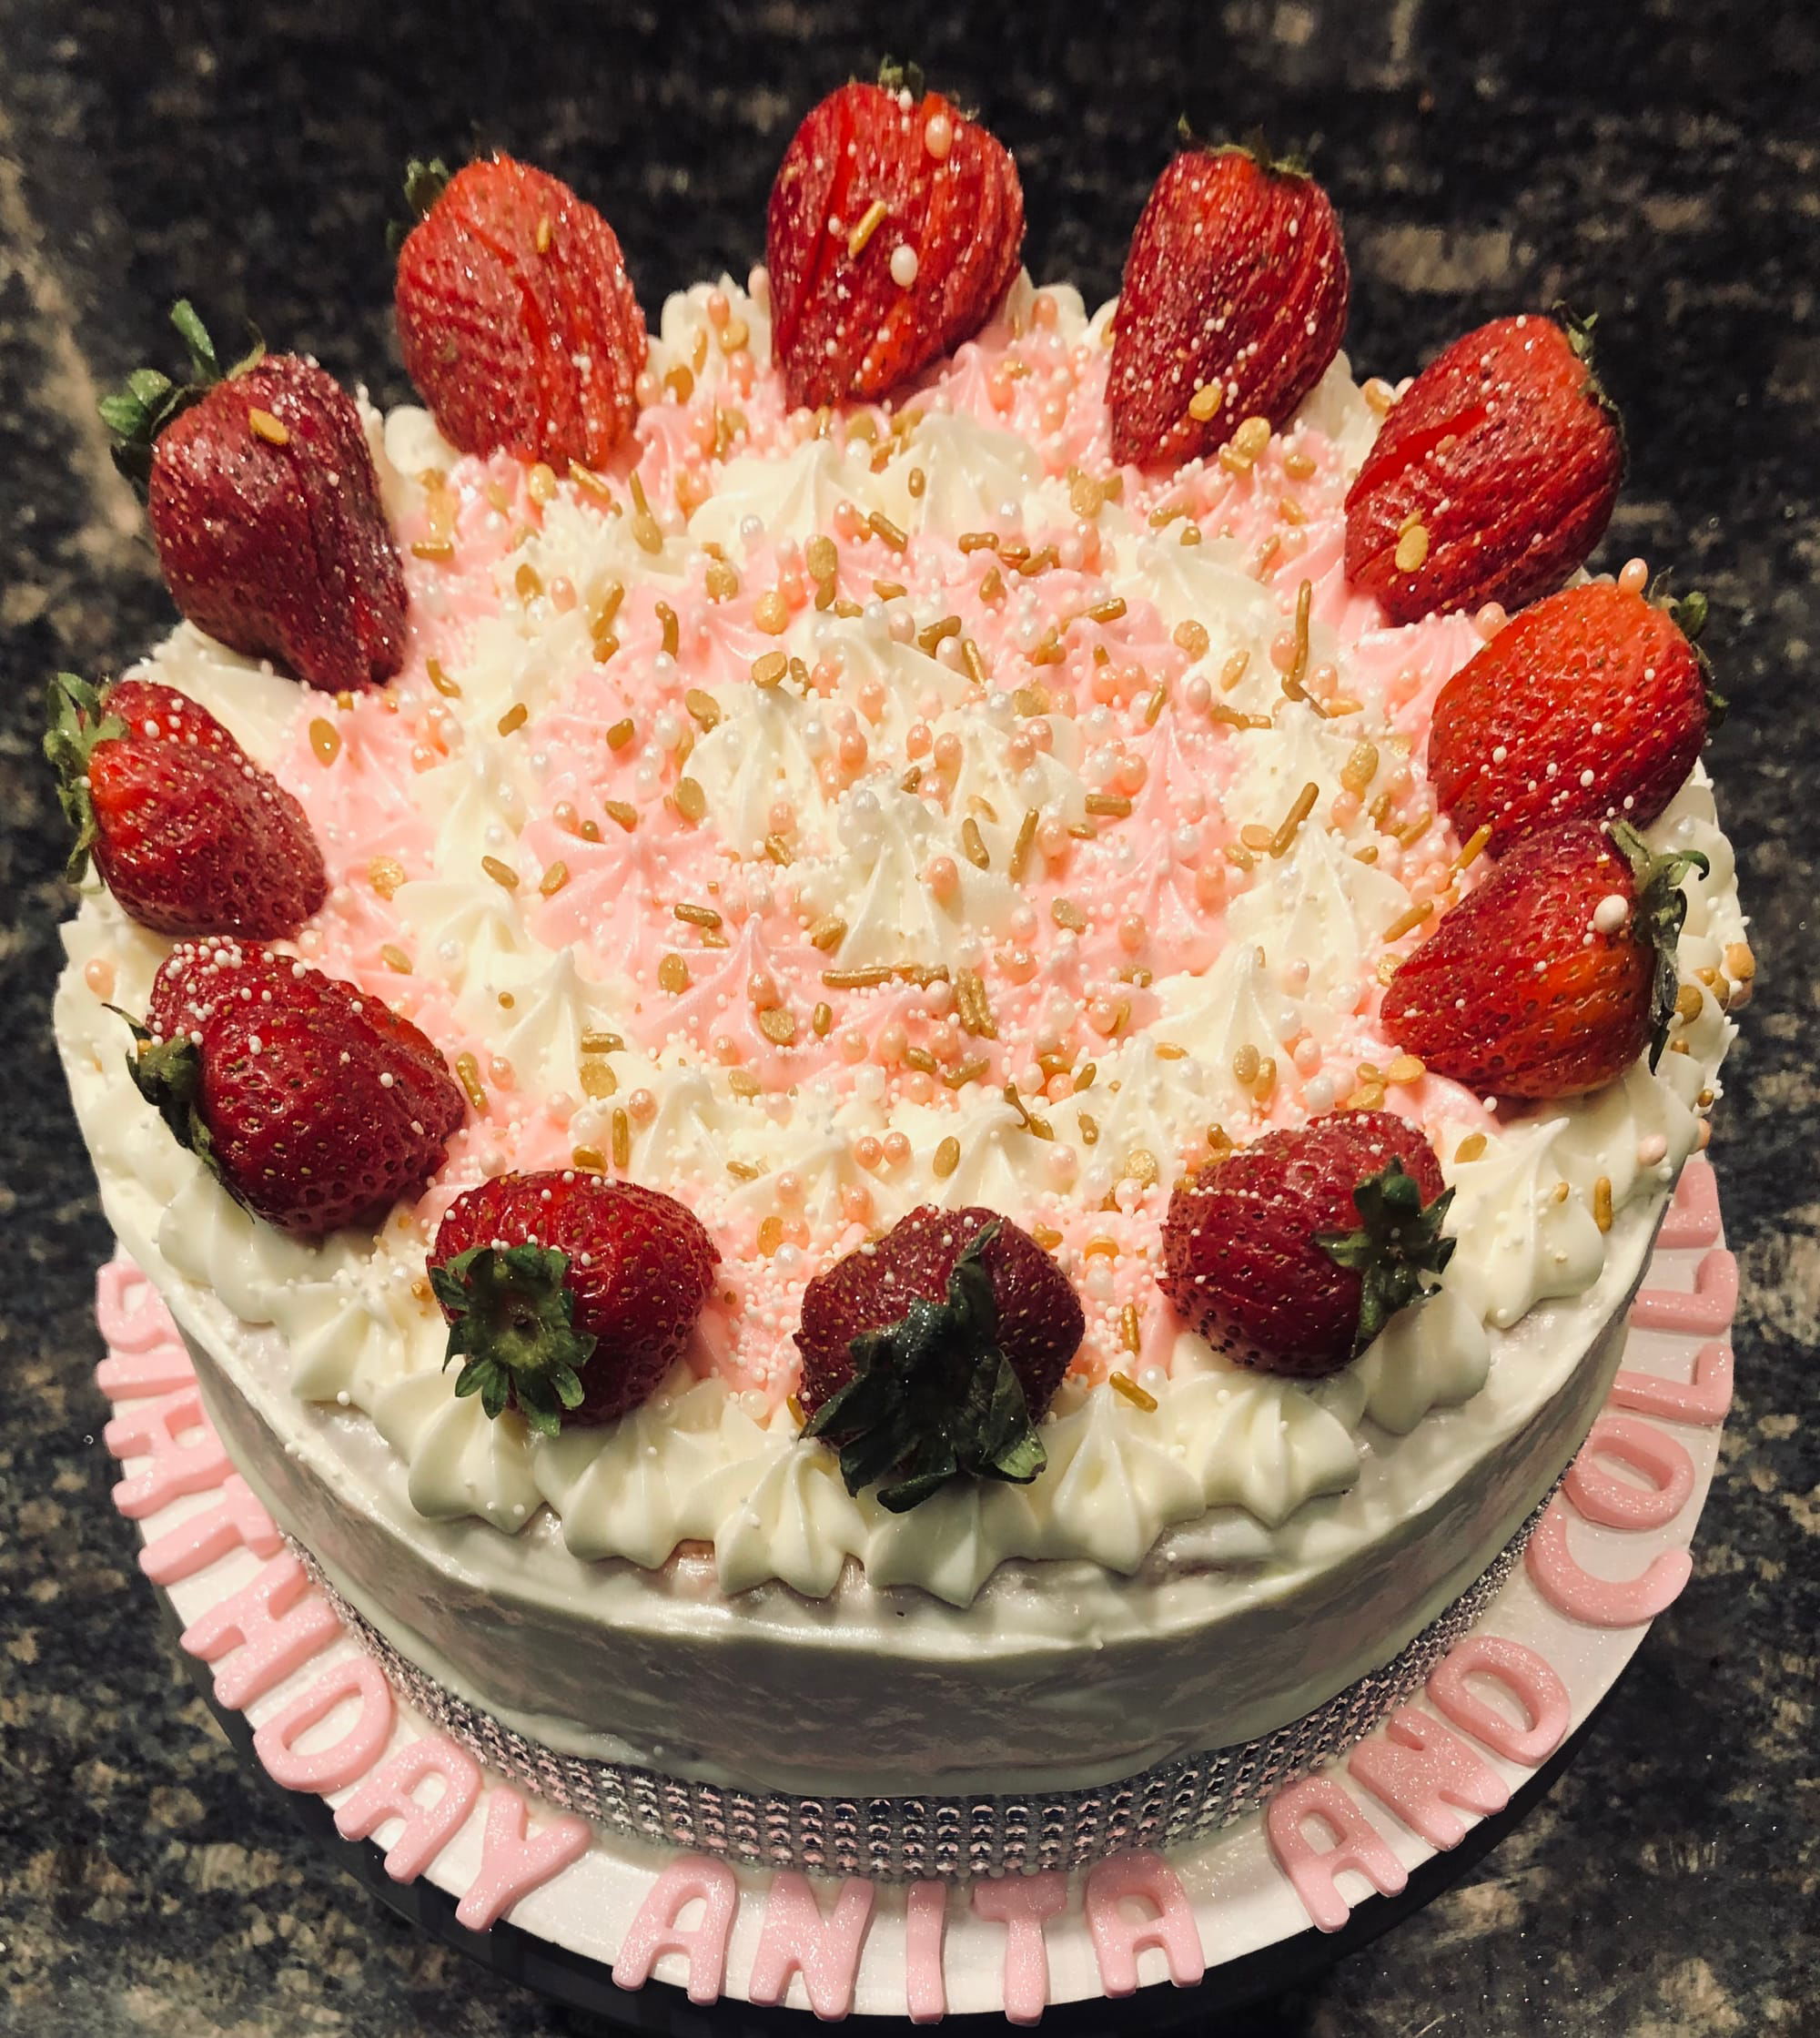 2 Layer Strawberry Cake With Cream Cheese Frosting & Strawberry Filling